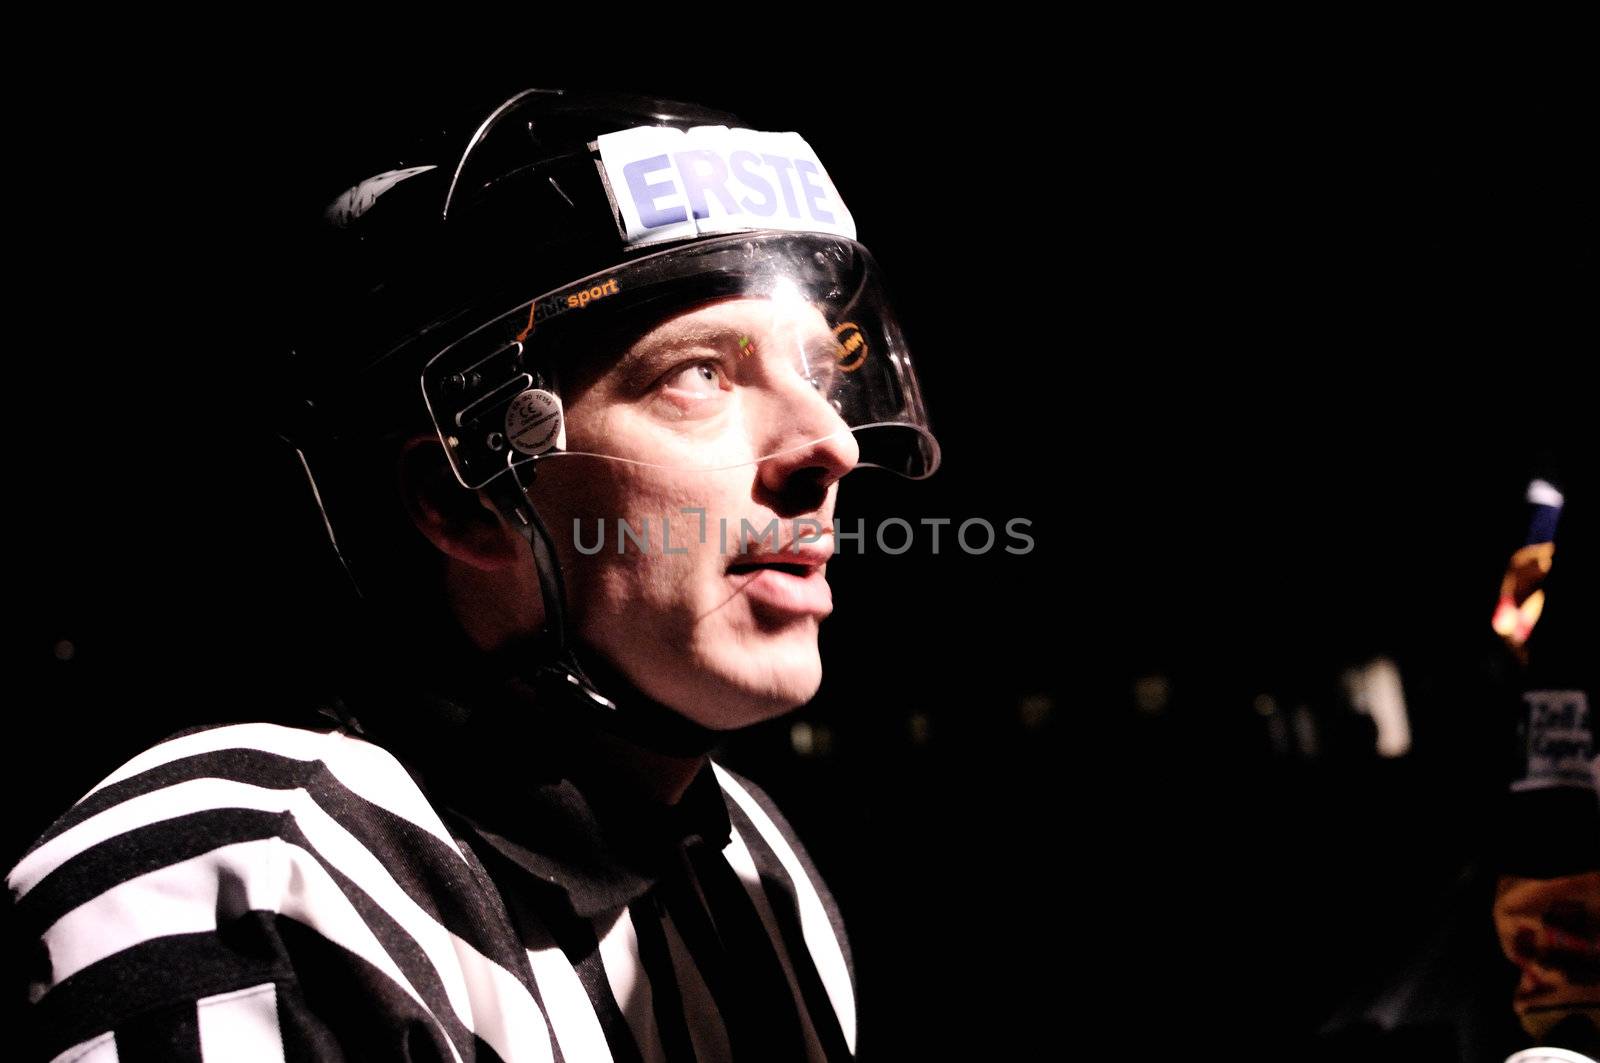 ZELL AM SEE, AUSTRIA - FEB 1: Austrian National League. Referee Roland Altersberger during light out break. Game EK Zell am See vs. ATSE Graz (Result 4-1) on February 1, 2011, at hockey rink of Zell am See